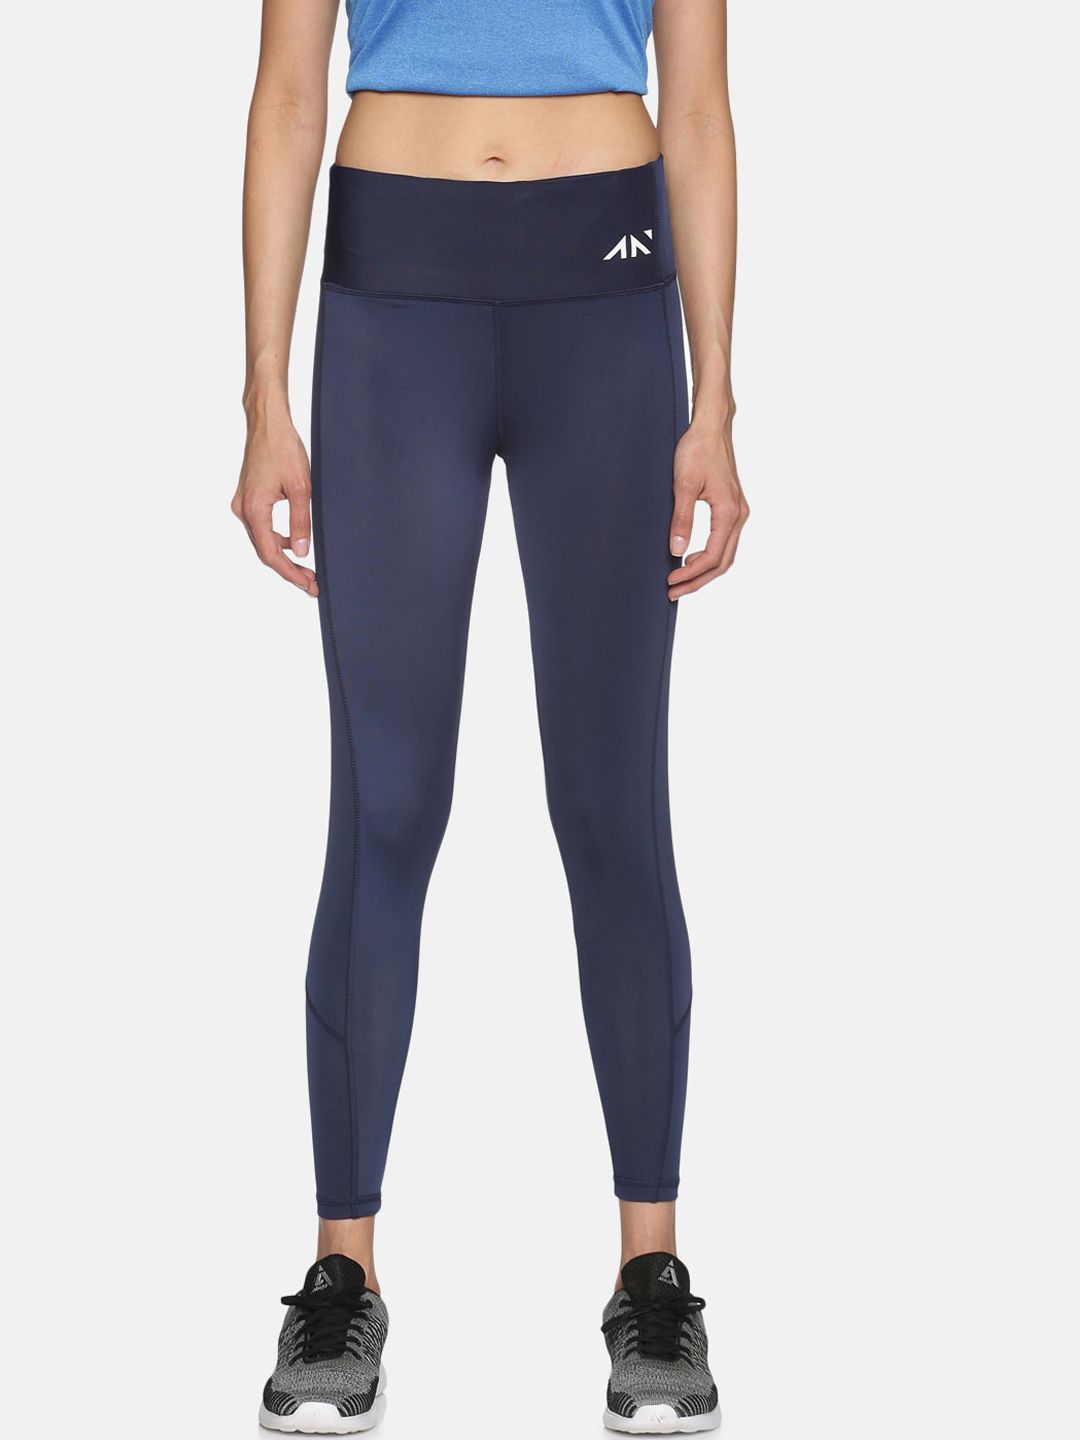 AESTHETIC NATION Women Navy Blue Solid Supple Performance Leggings Price in India